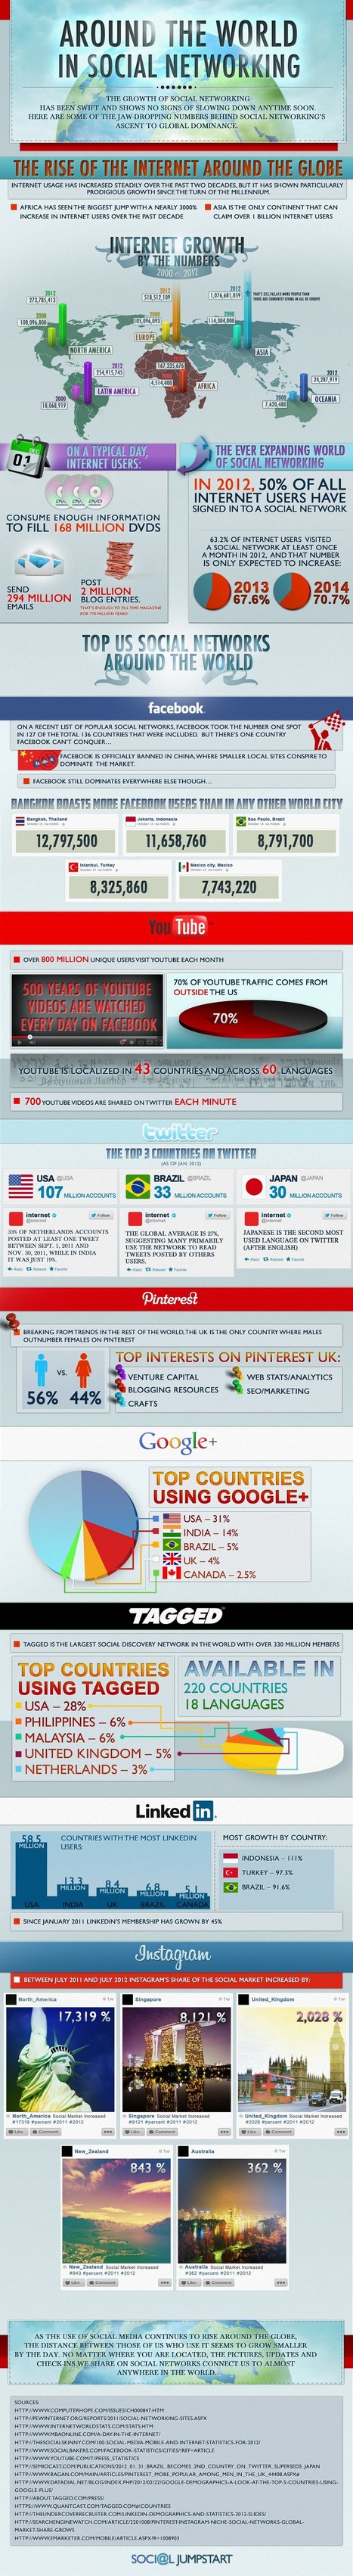 Social Media Around the World: A Complete Infographic Guide | Business Improvement and Social media | Scoop.it